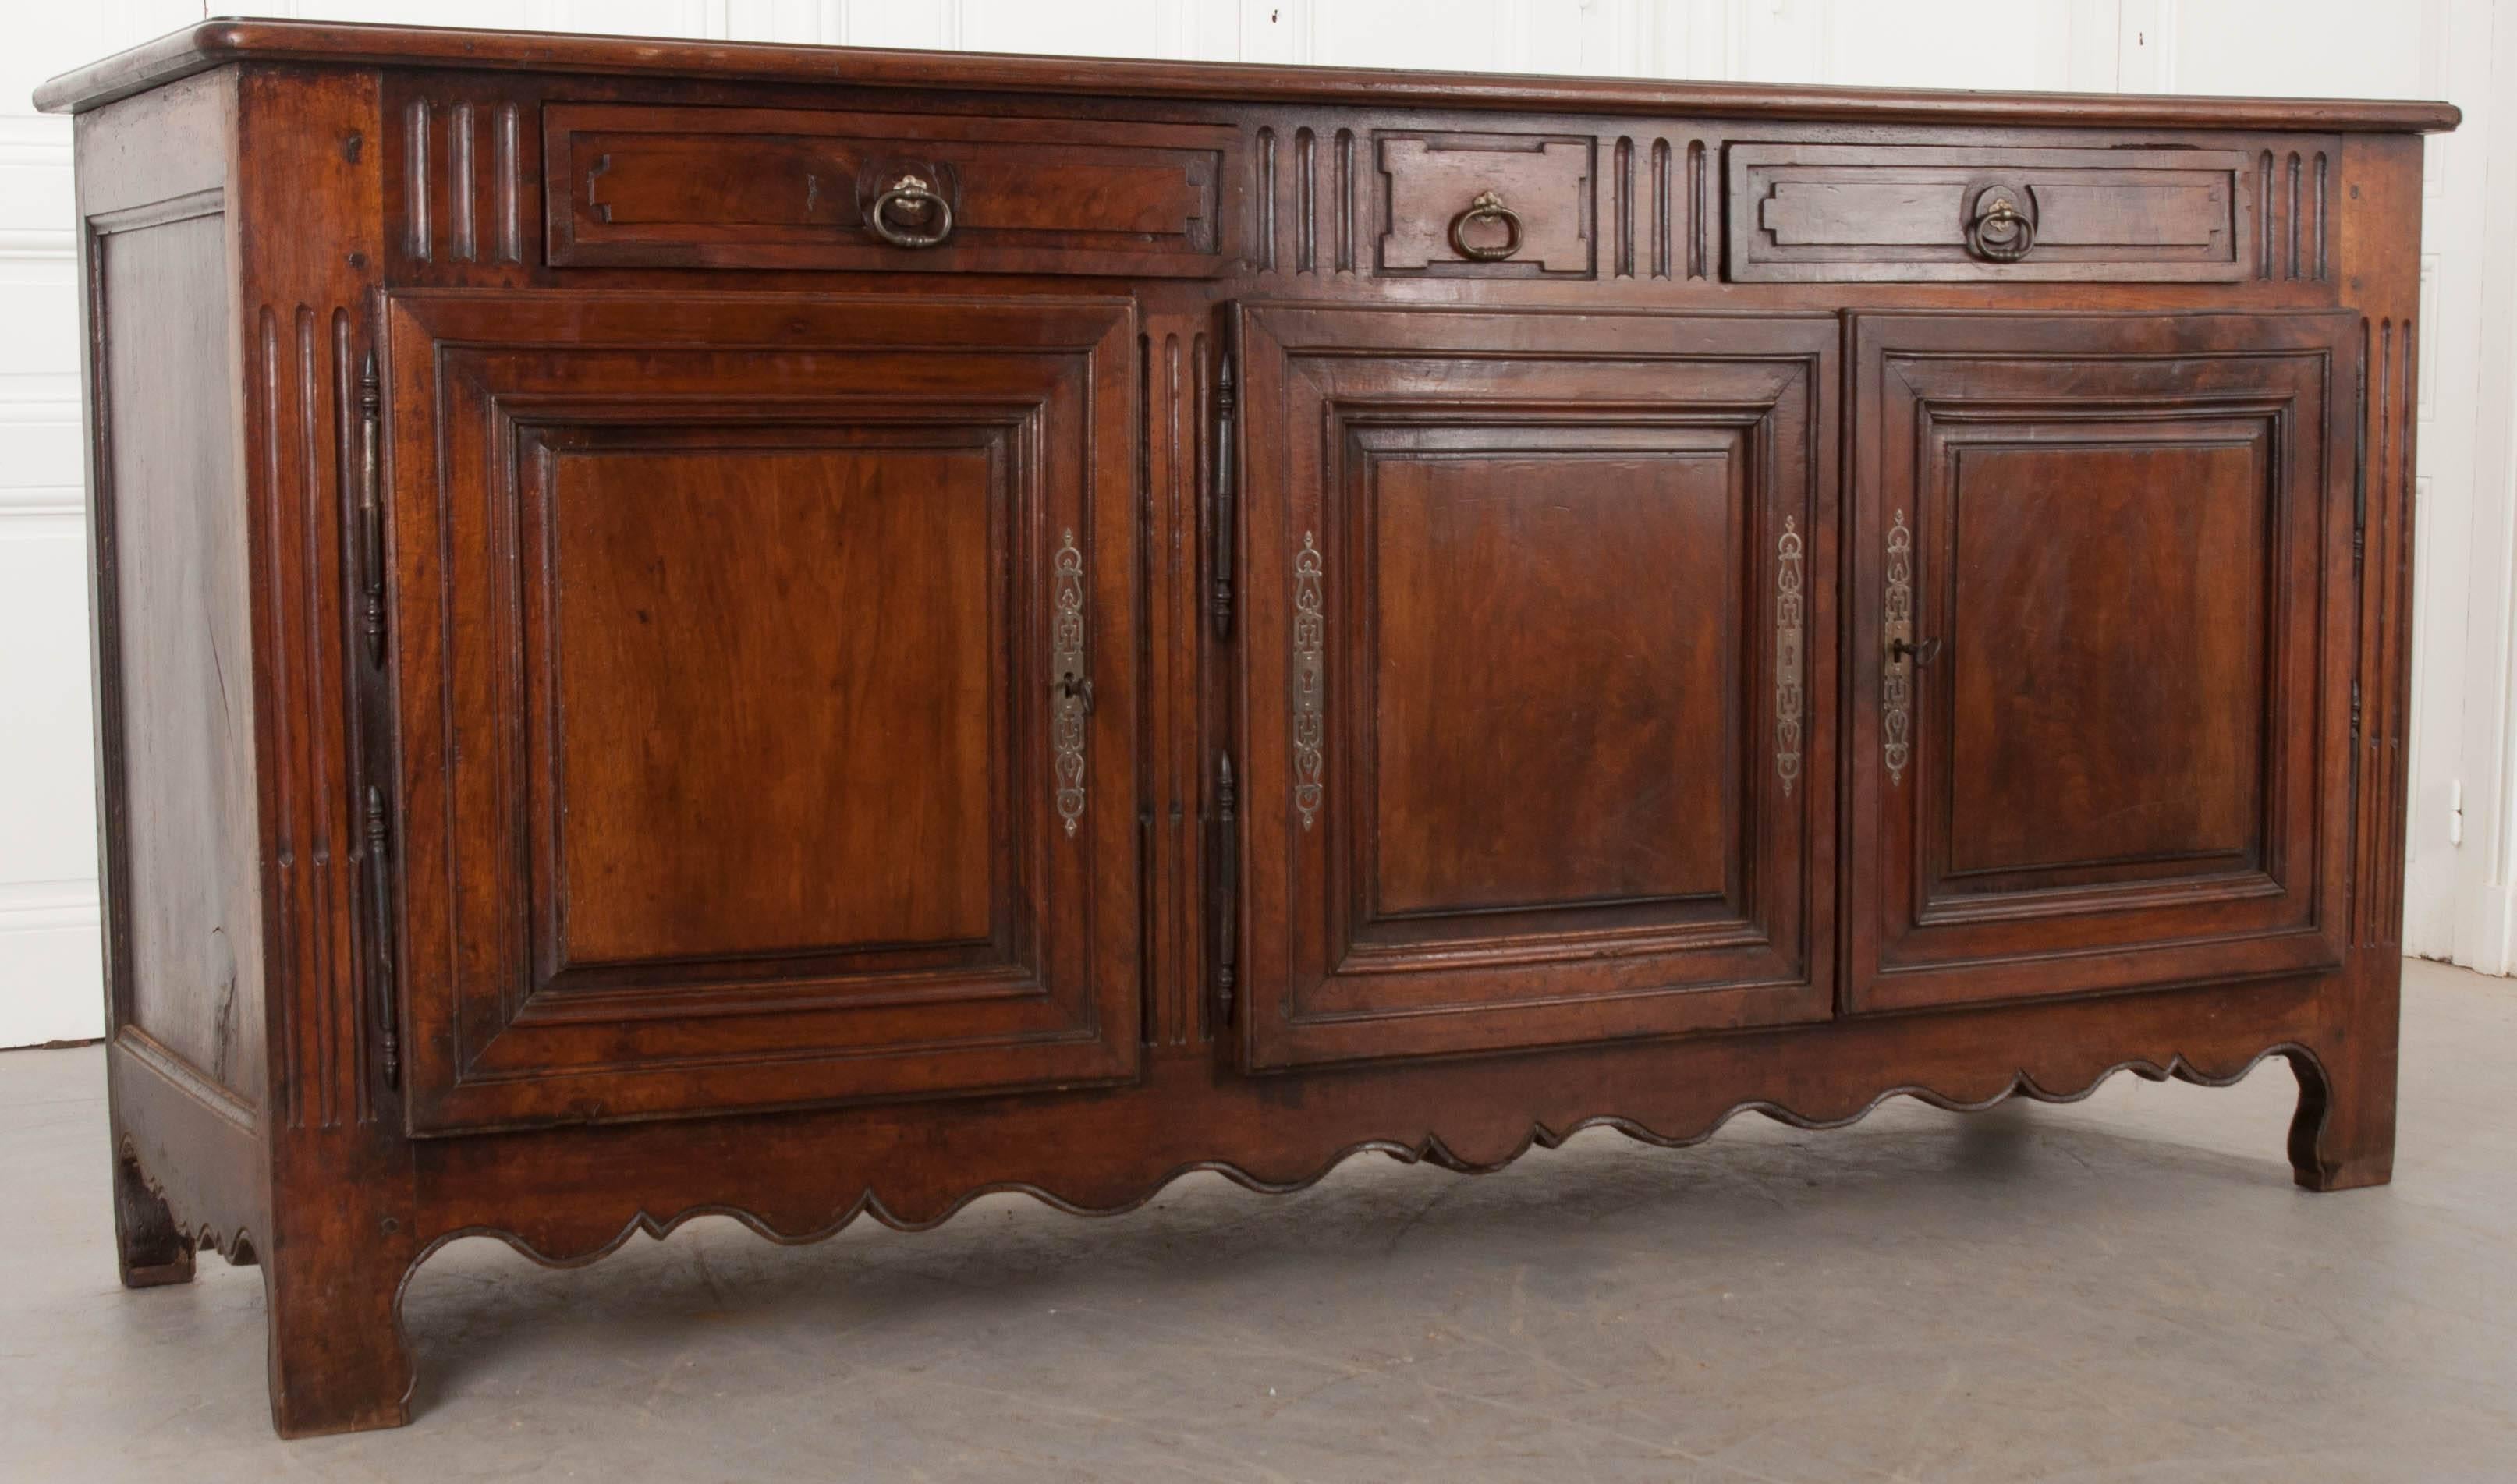 A grand solid-walnut enfilade from 19th century Provincial France. This large case piece has three hand-carved panel doors, with working locks, that are hung on steel barrel hinges dominating the façade. Above these doors are two drawers, equipped